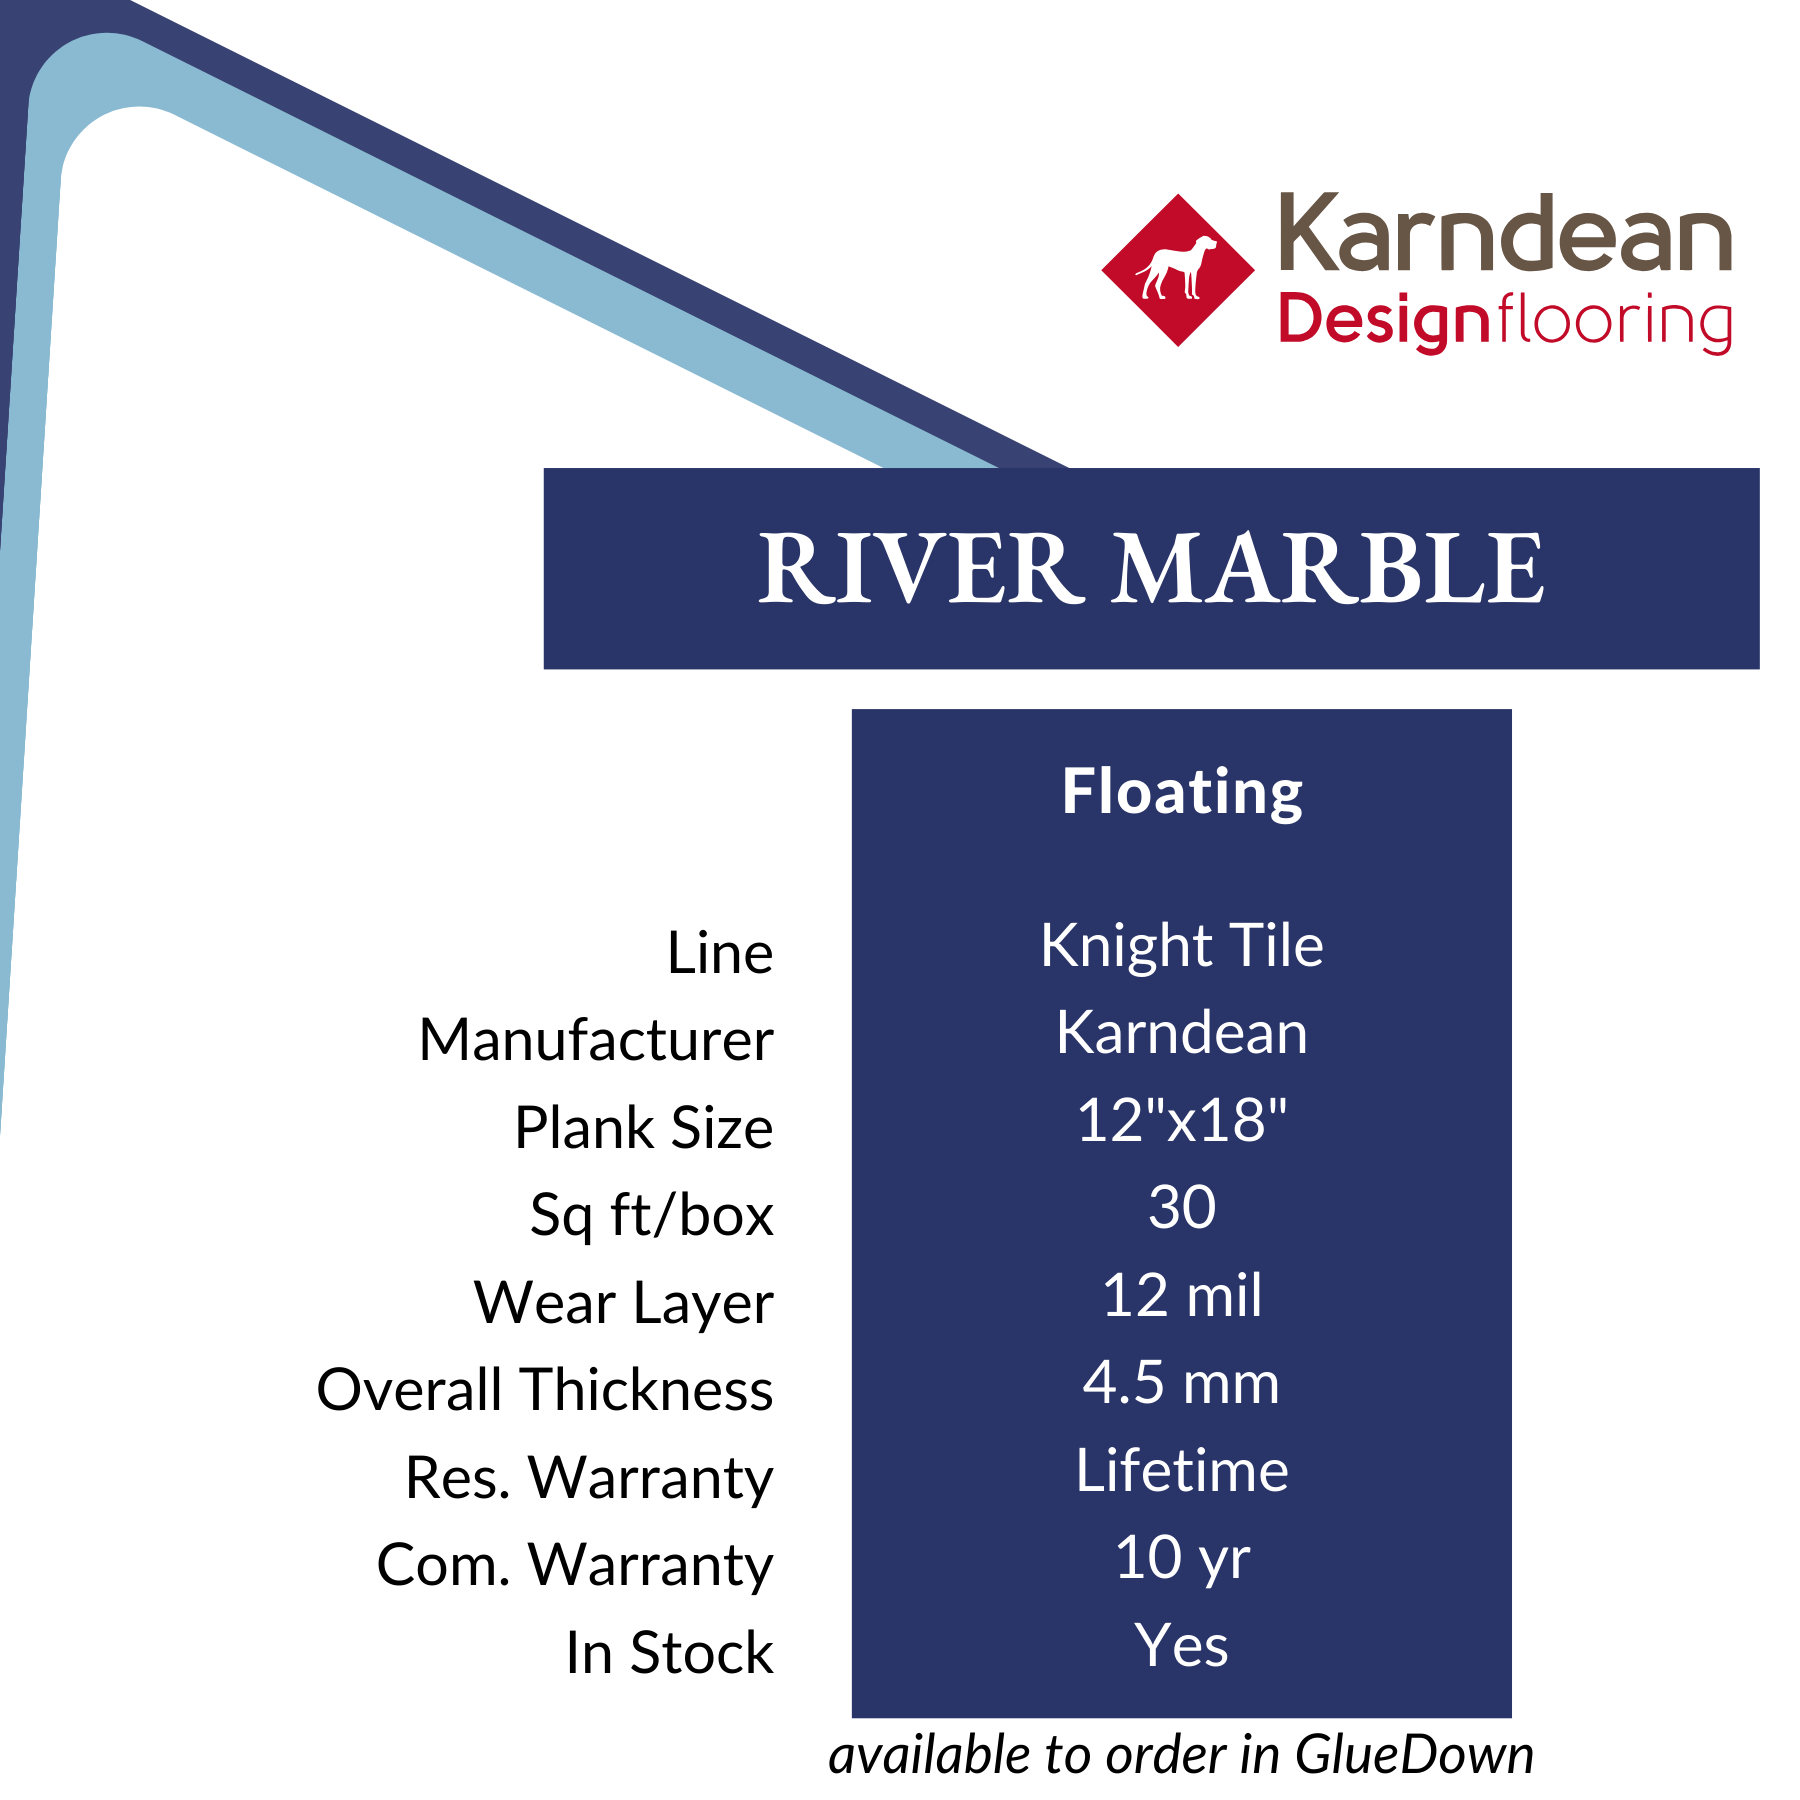 River Marble LVT by Karndean at Calhoun's Flooring in Springfield, IL Specs 12 mil wear layer